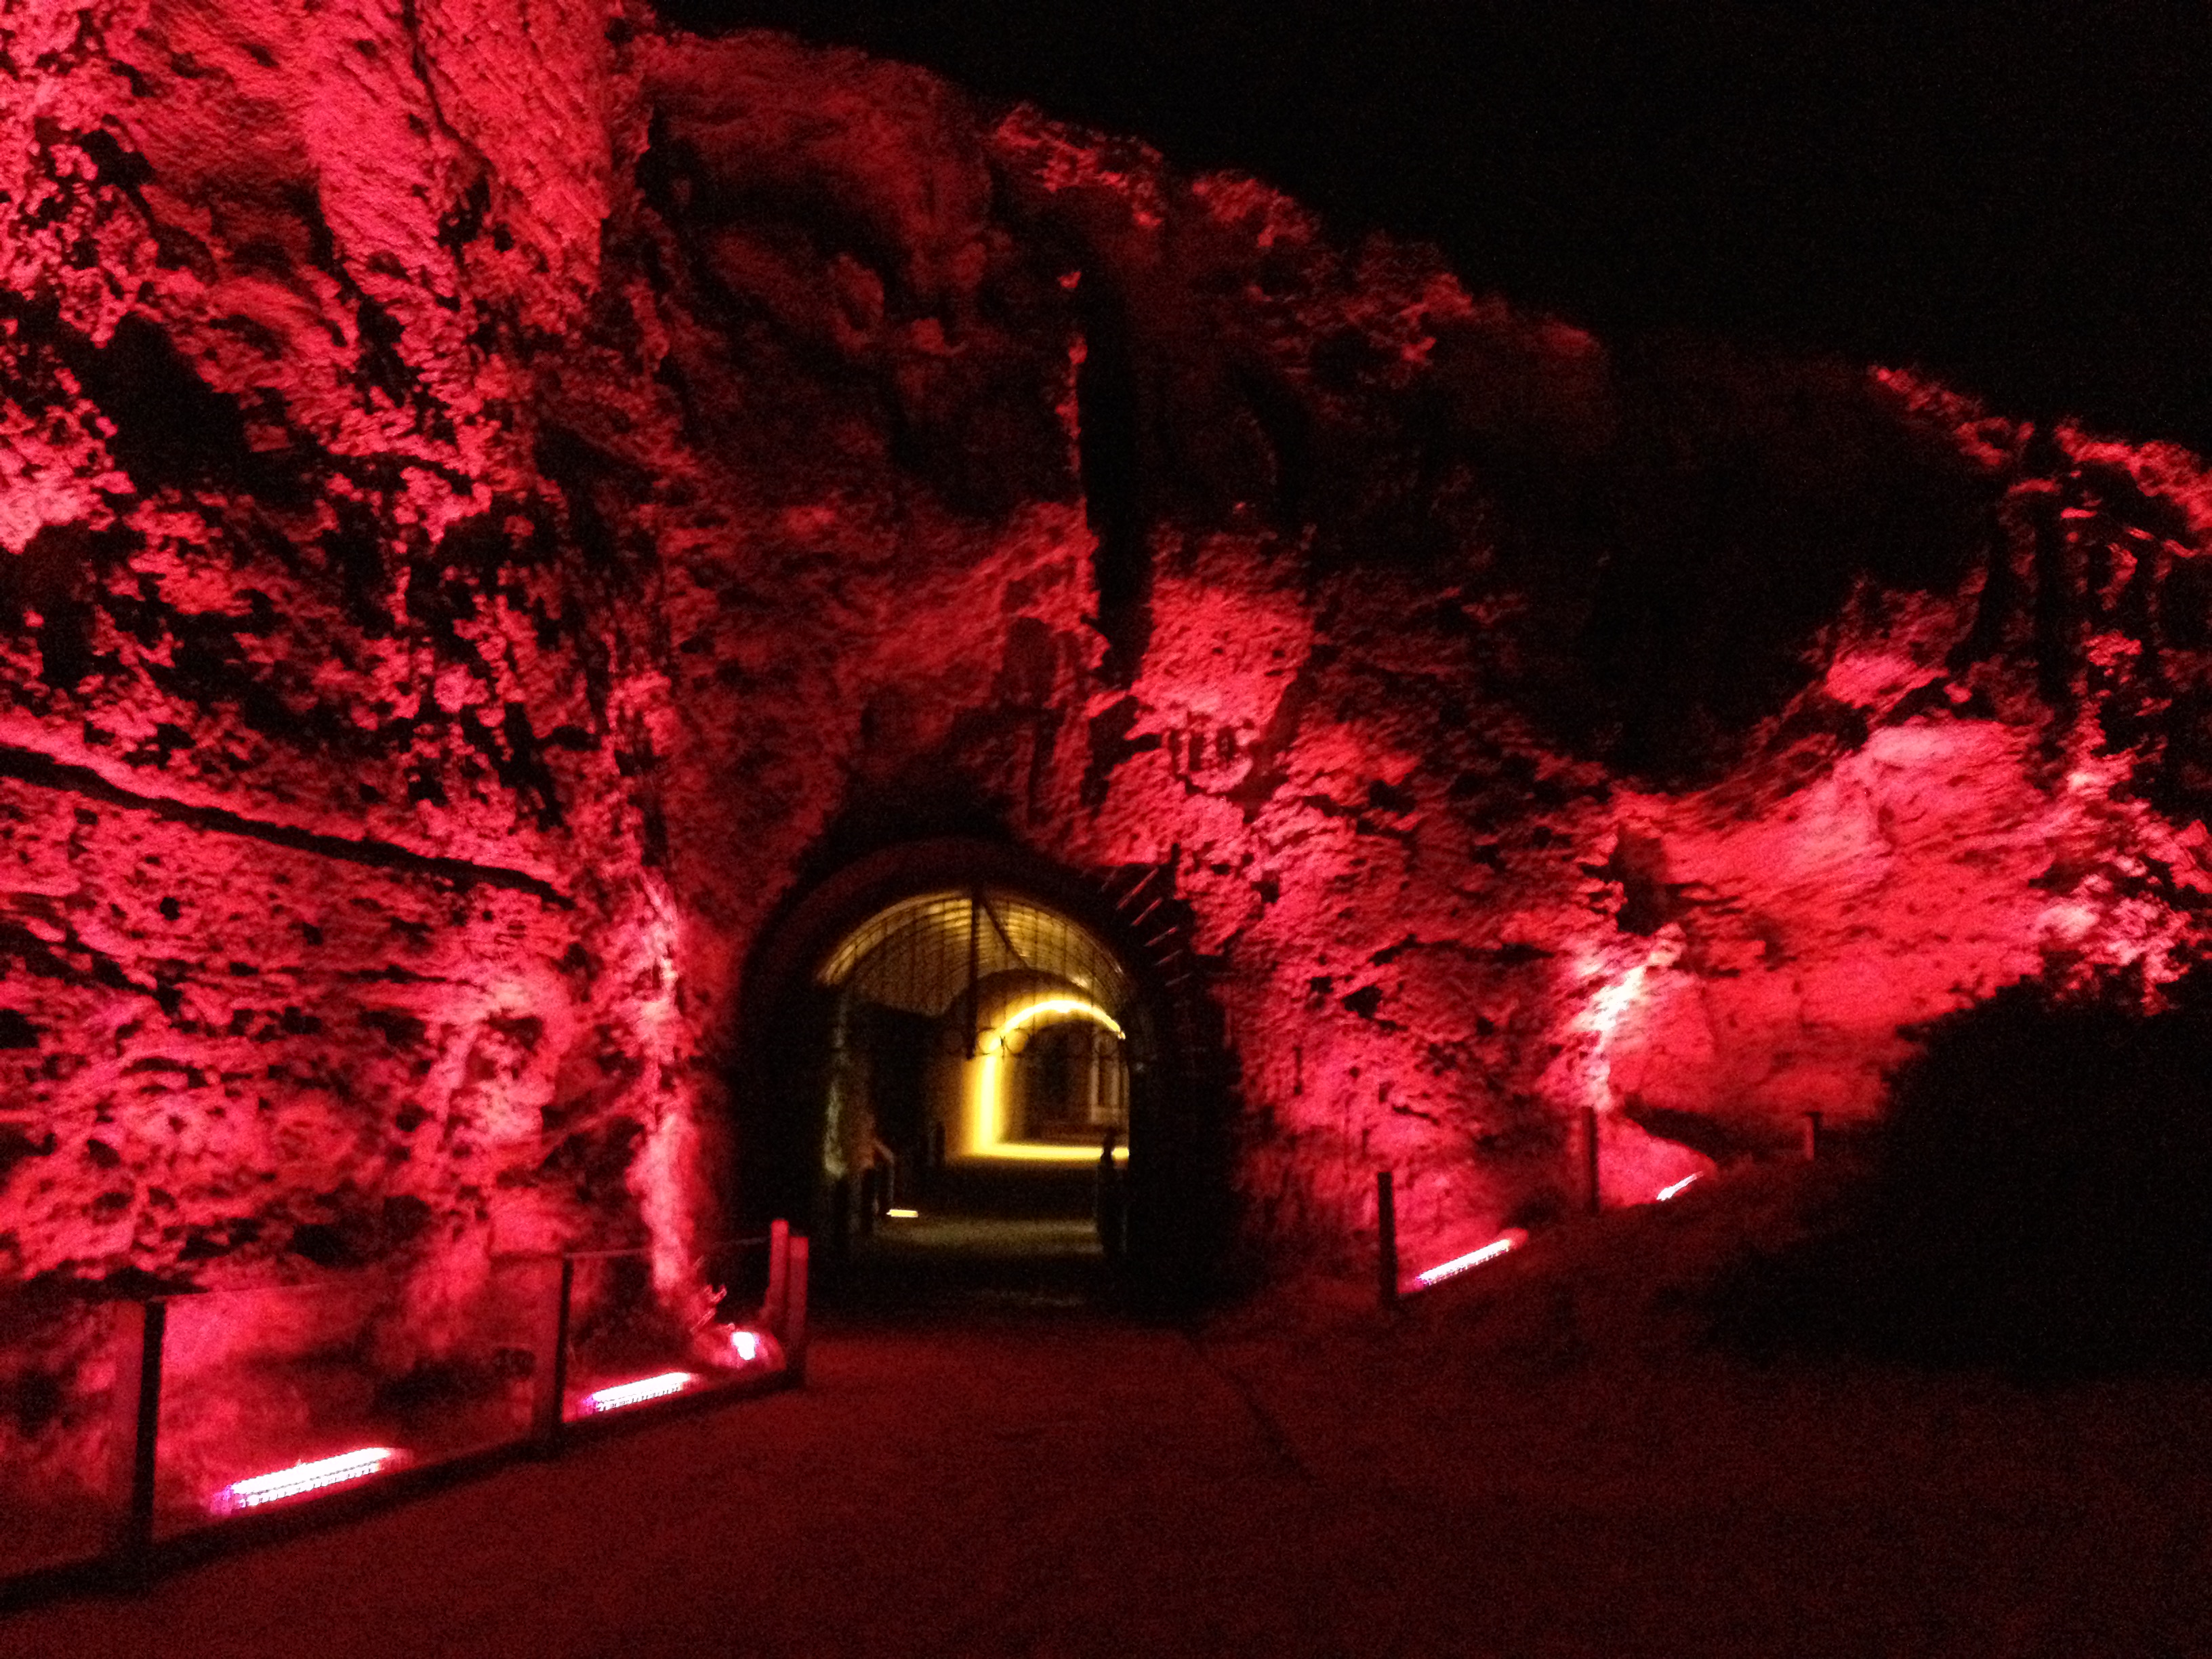 Freo cave lit up